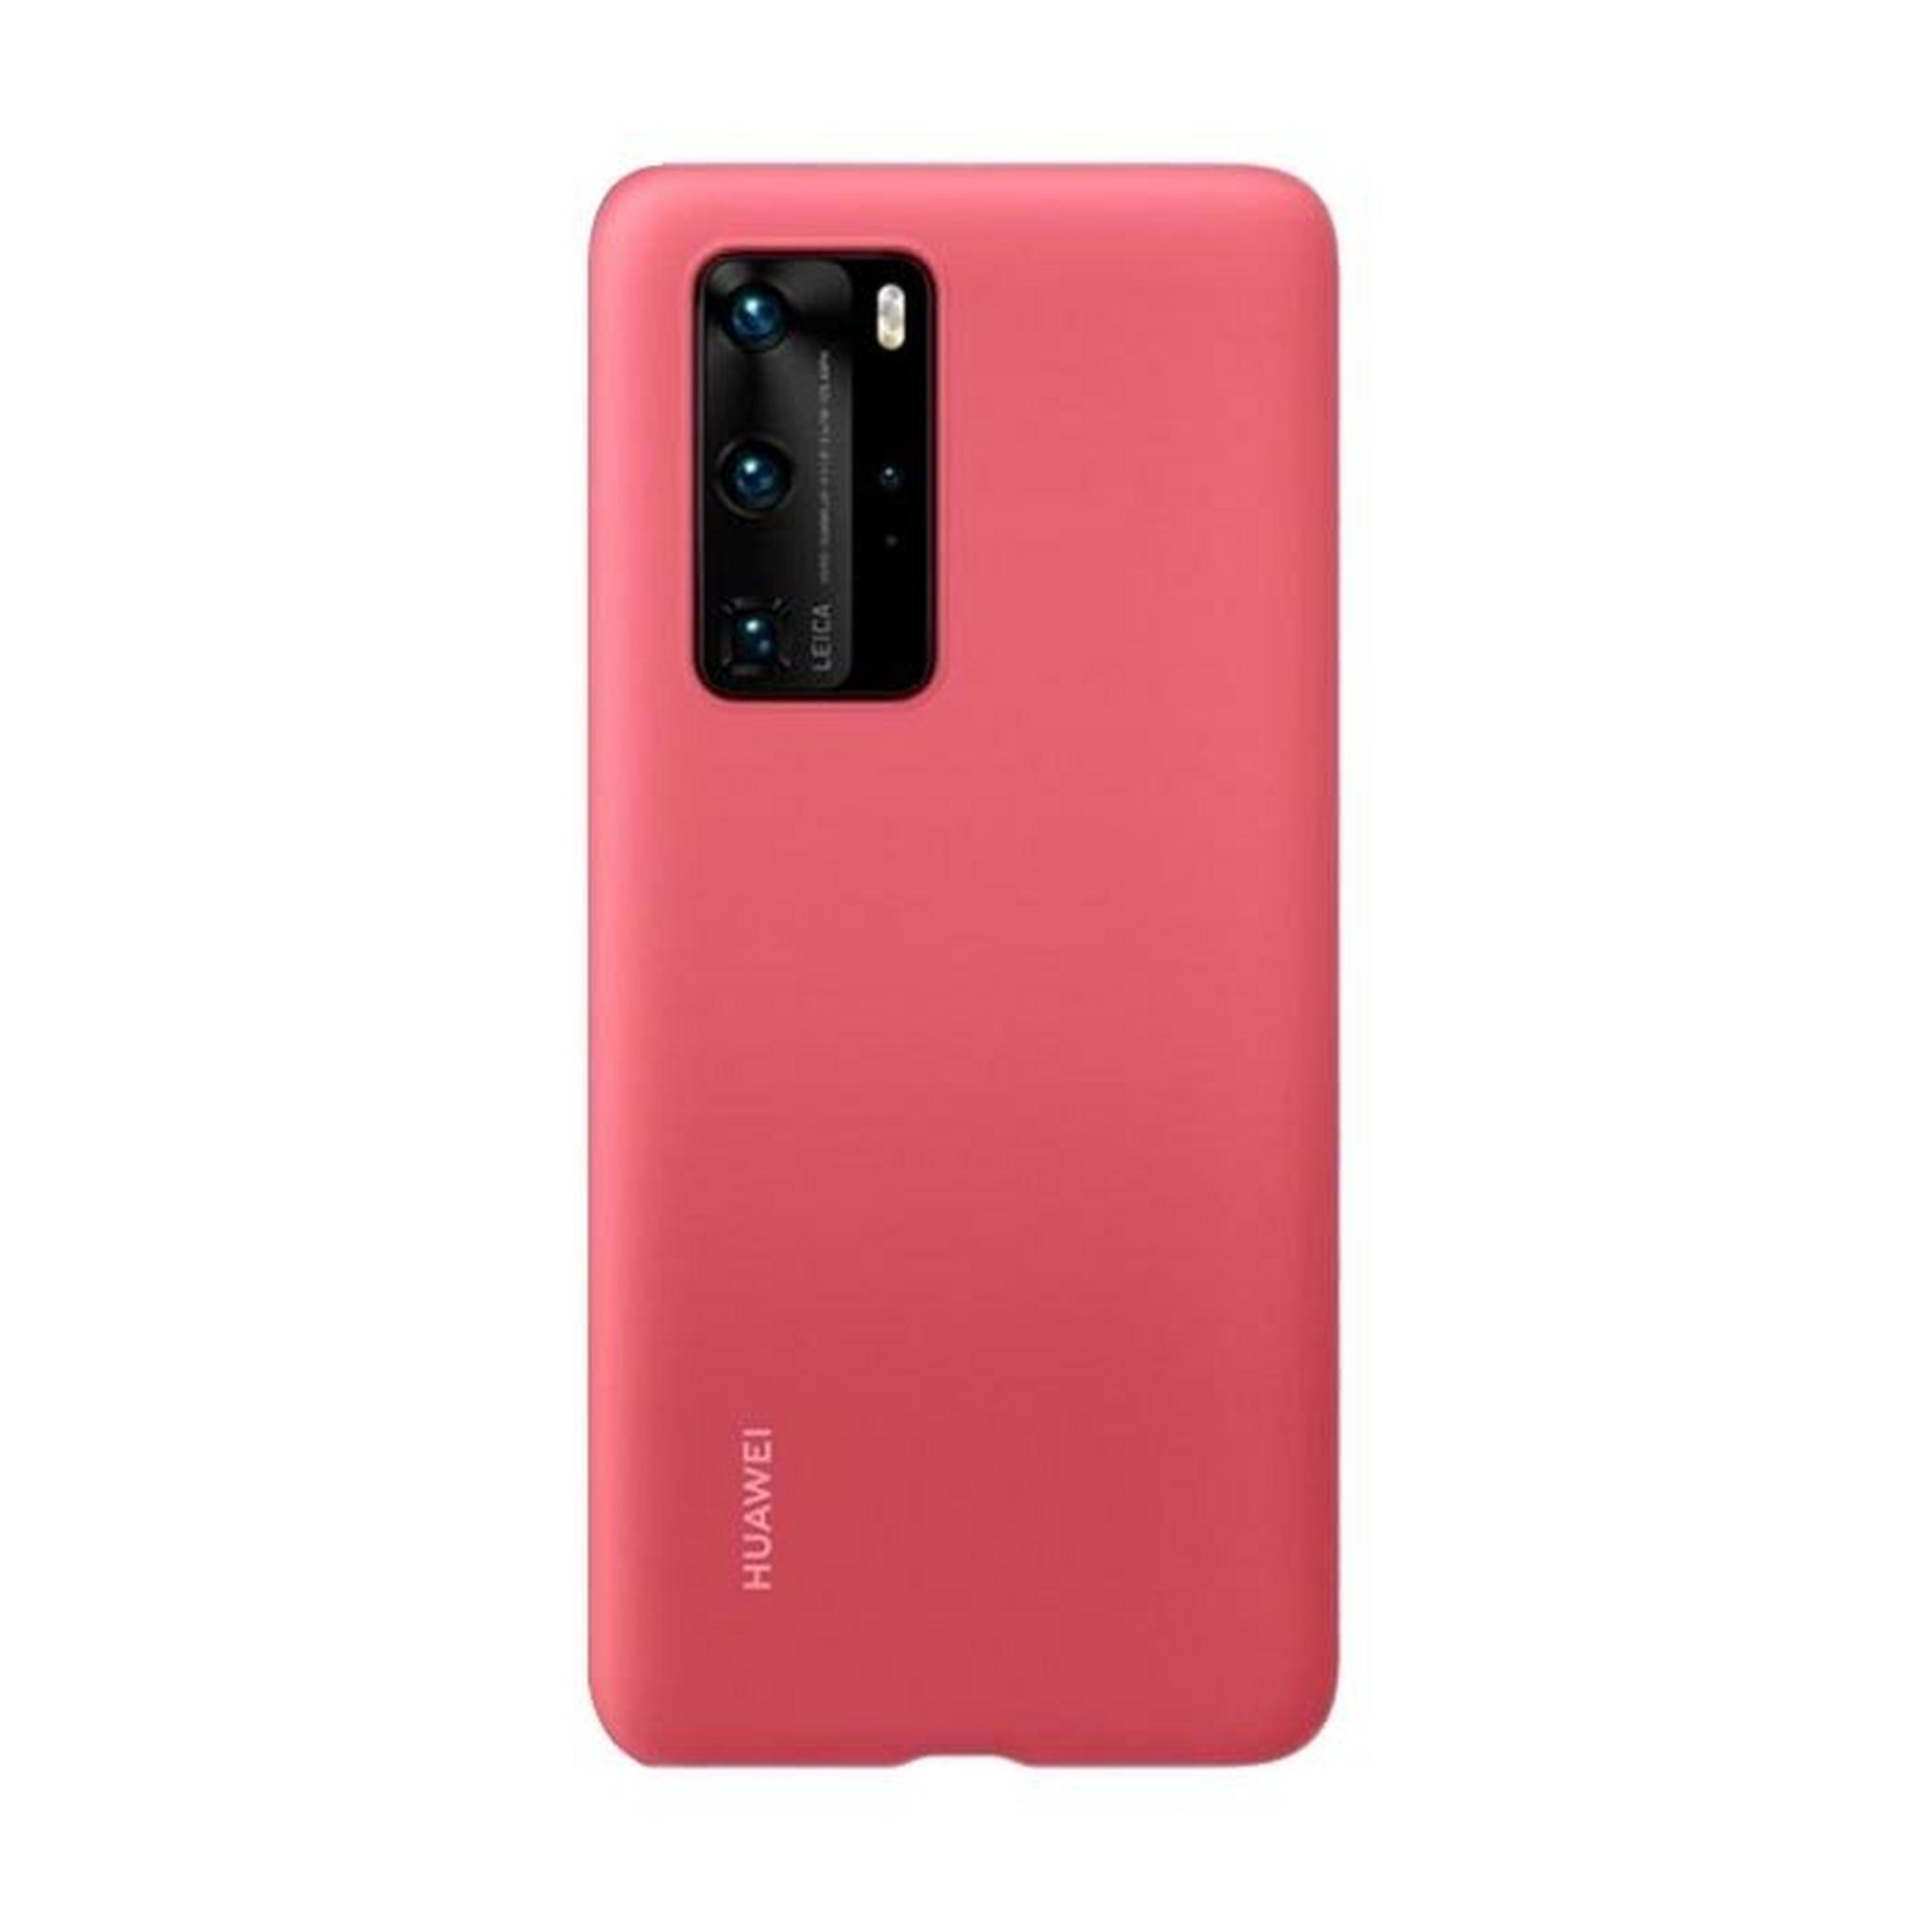 Huawei P40 Pro Silicone Back Case (51993805) - Red